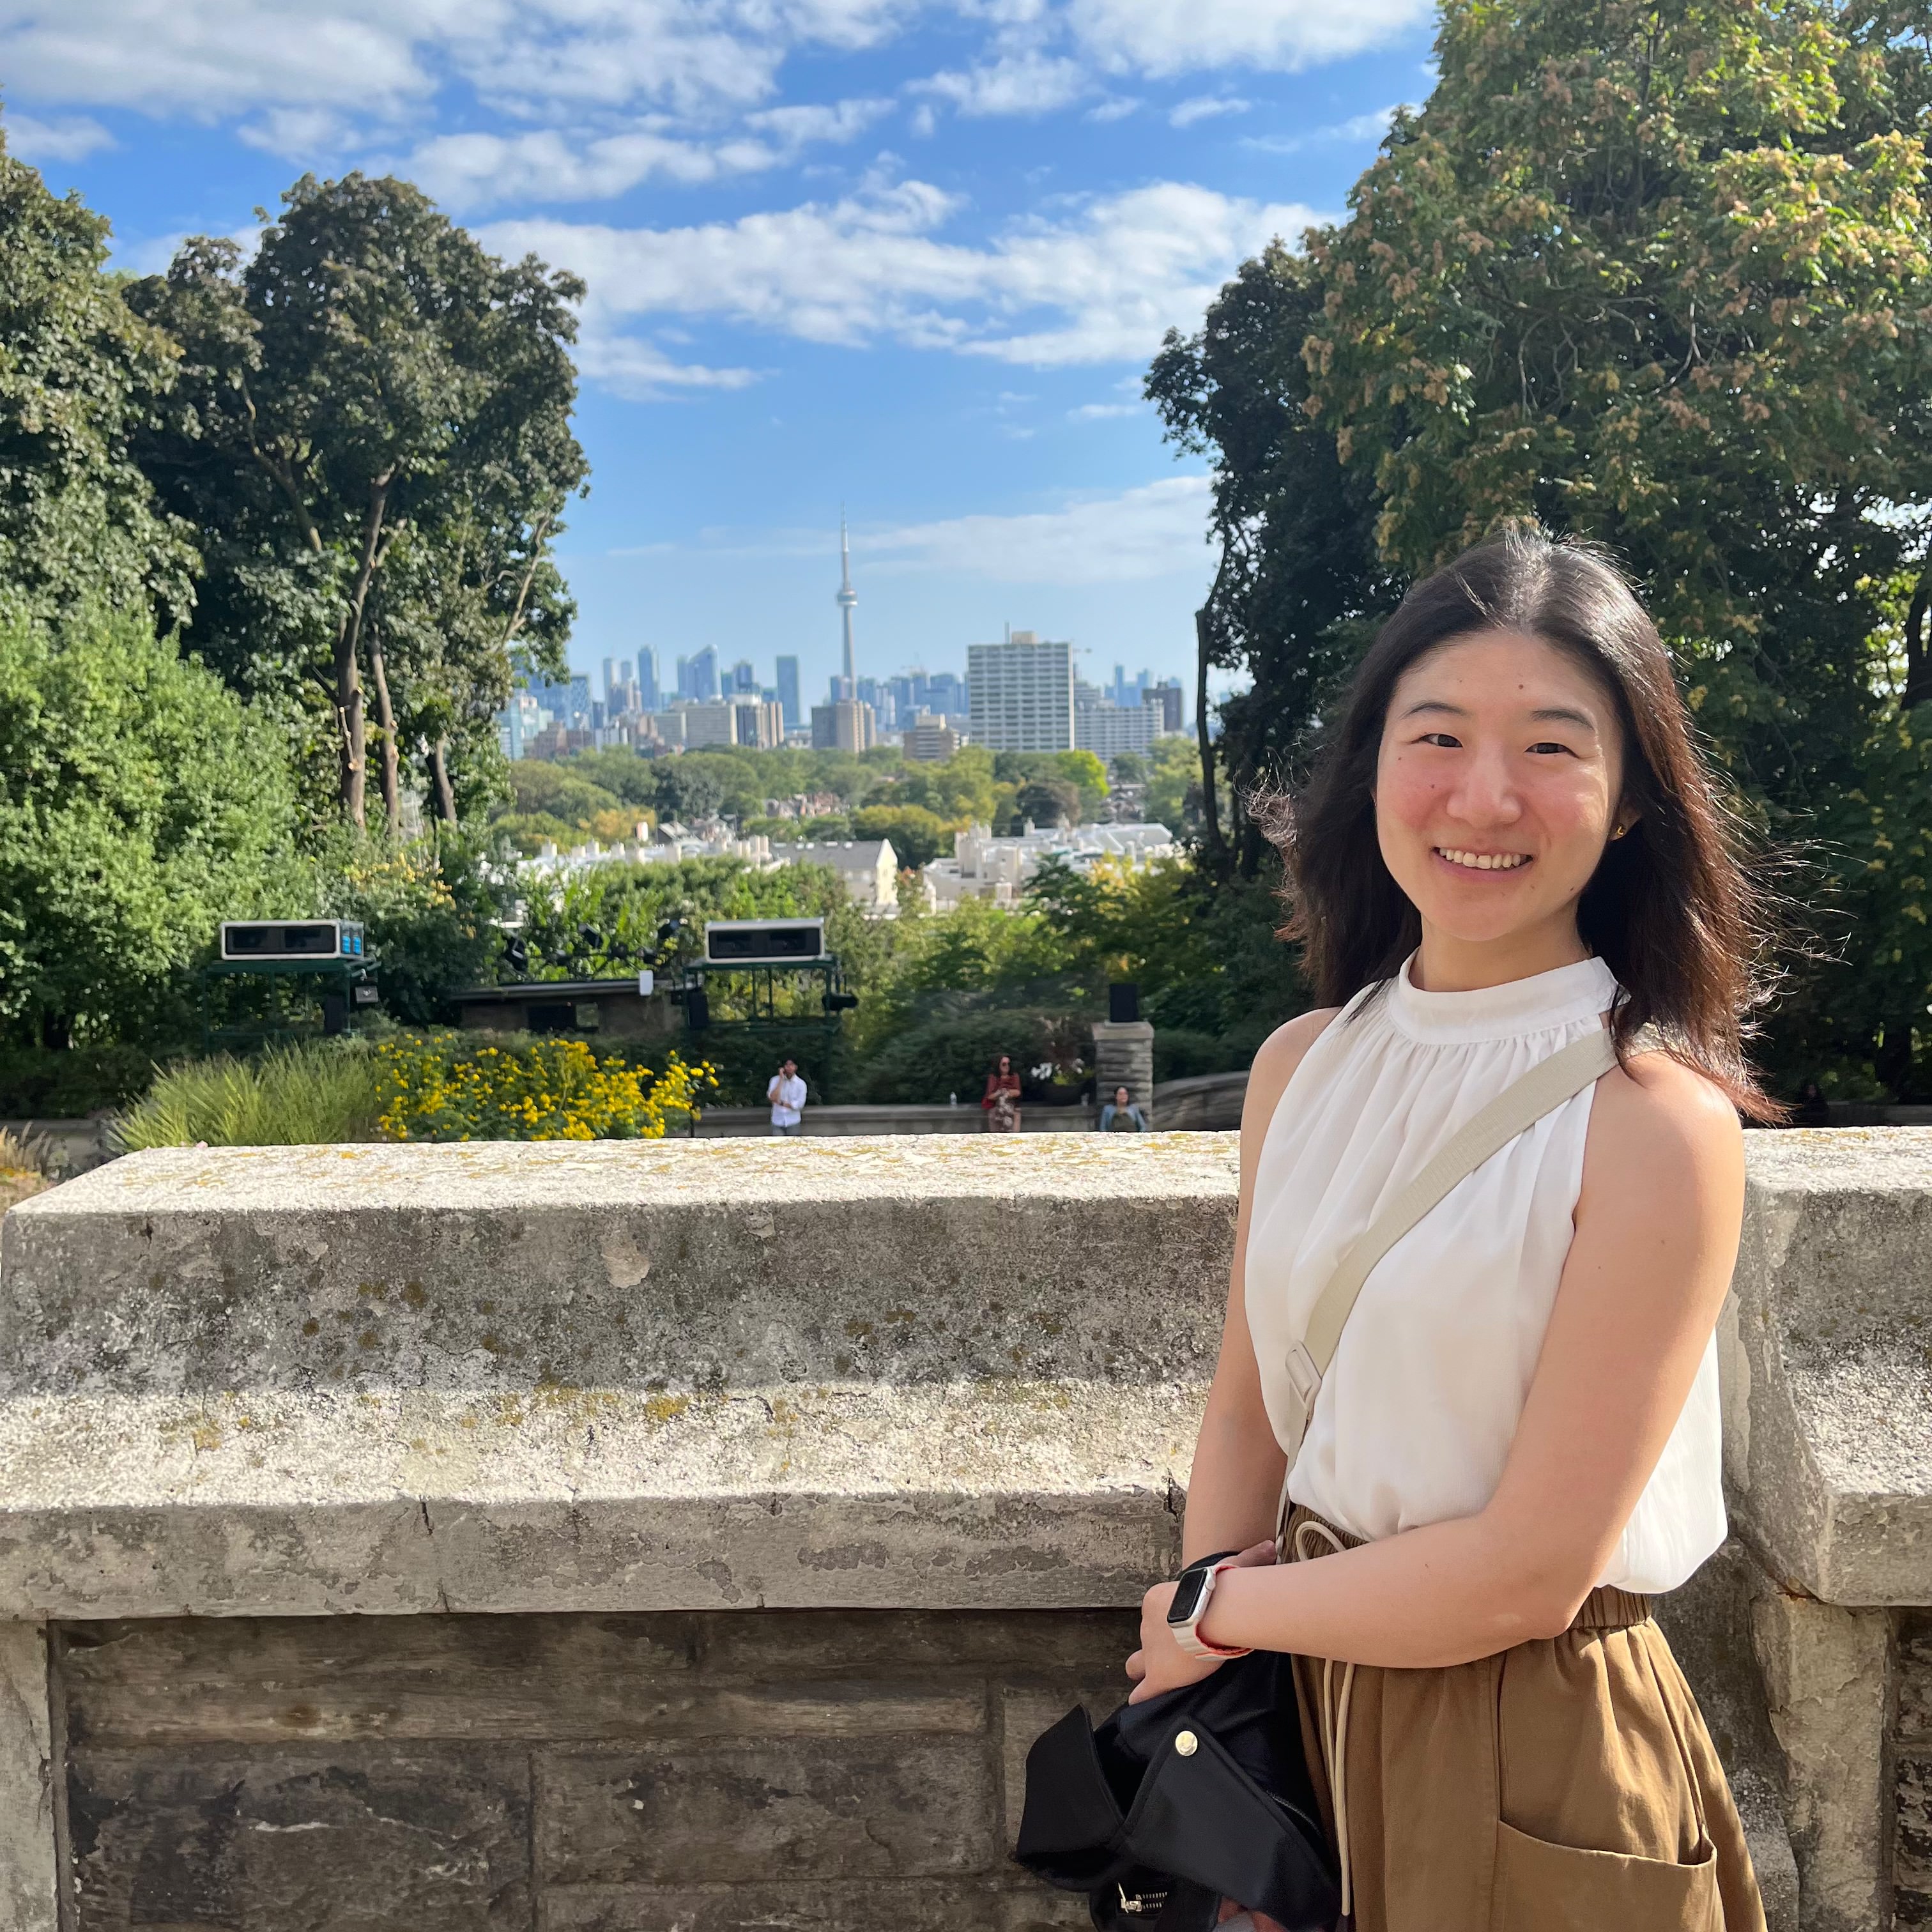 A young Asian woman in a white blouse, with long black hair, poses in front of a vista of downtown Toronto, complete with CN tower.